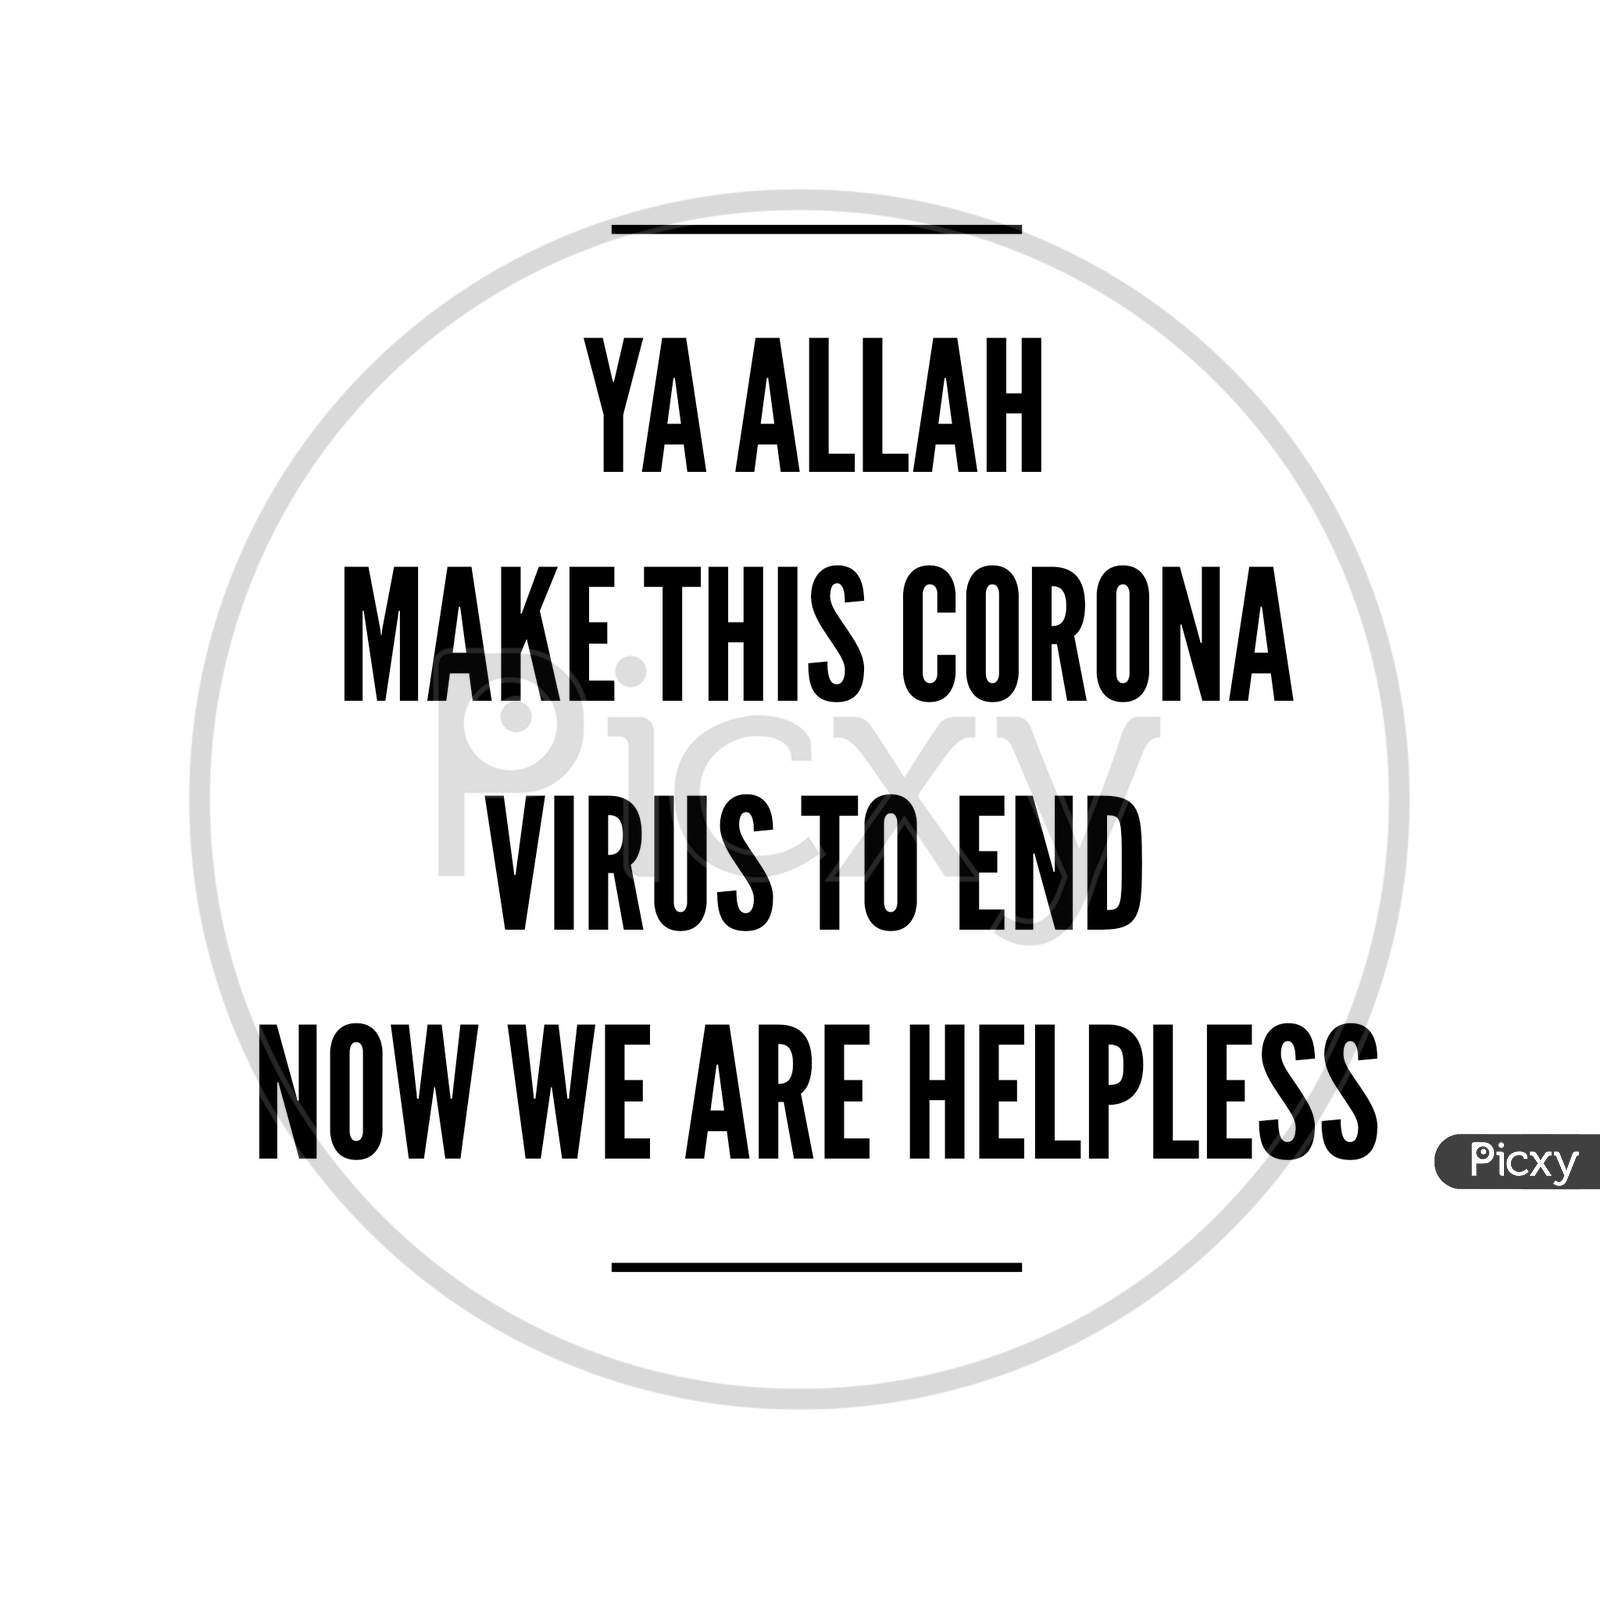 Image With A Text "Ya Allah Make This Corona Virus To End Now We Are Helpless"